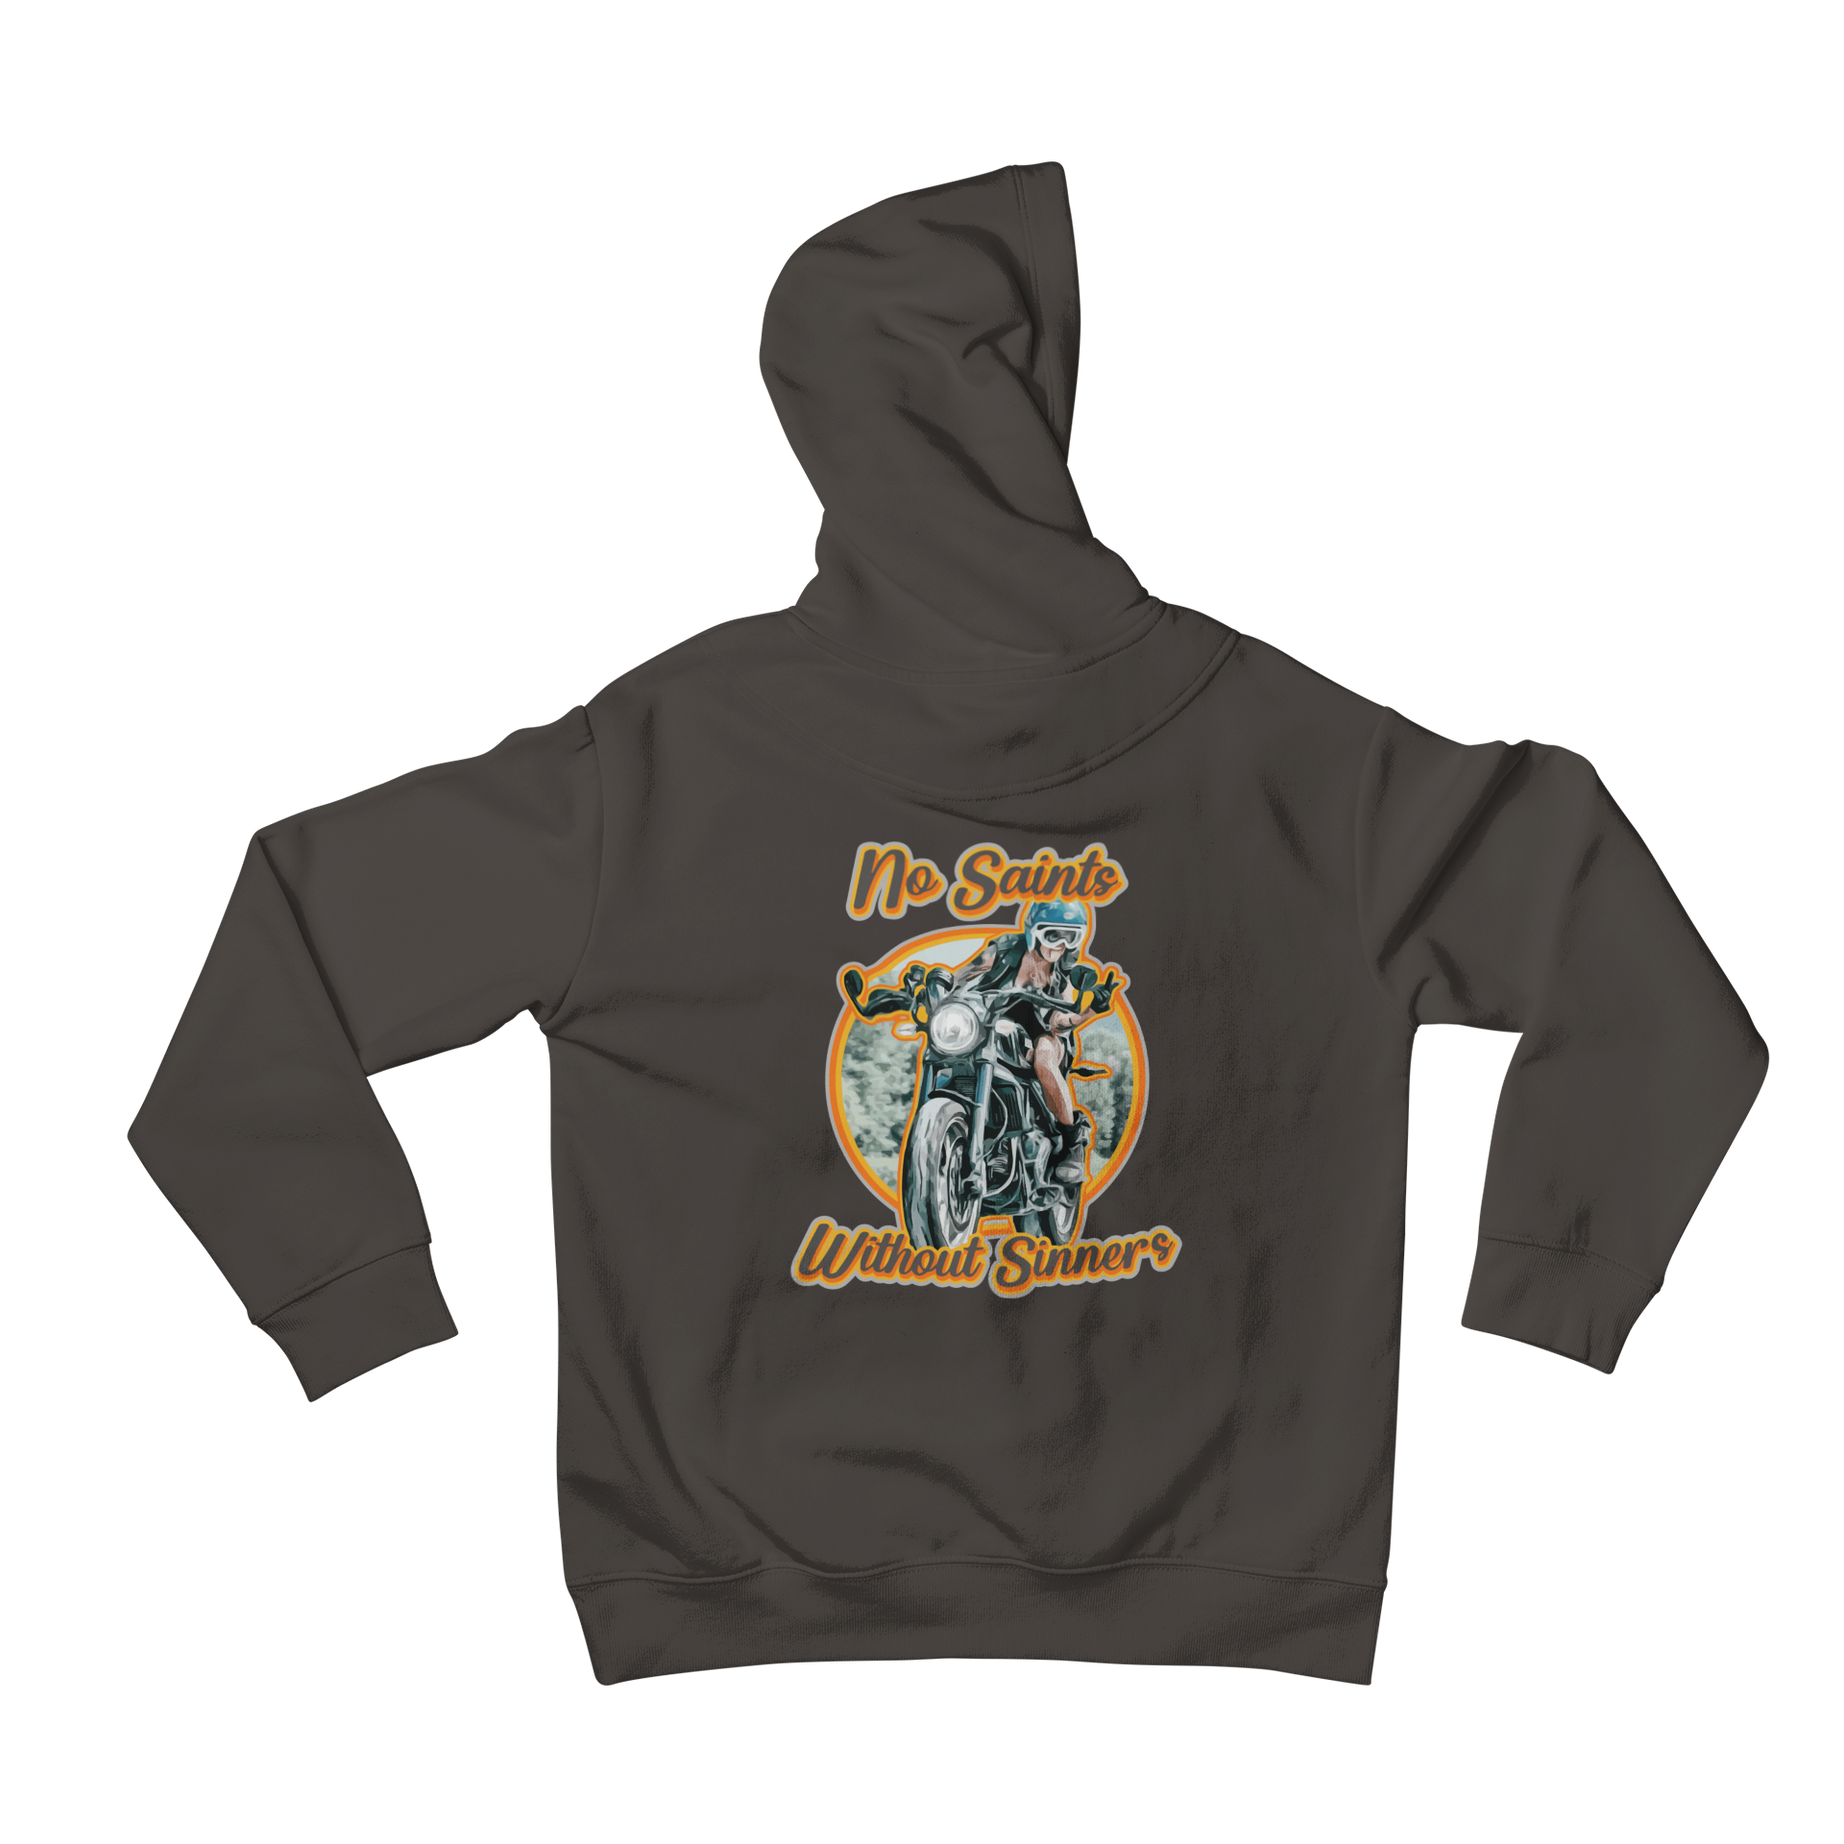 Do you want to make a bold statement? Check out teevolution's "There Ain't No Saints Without Sinners" hoodie. This back print hoodie is one-of-a-kind and perfect for anyone looking to make a statement. Get yours today!